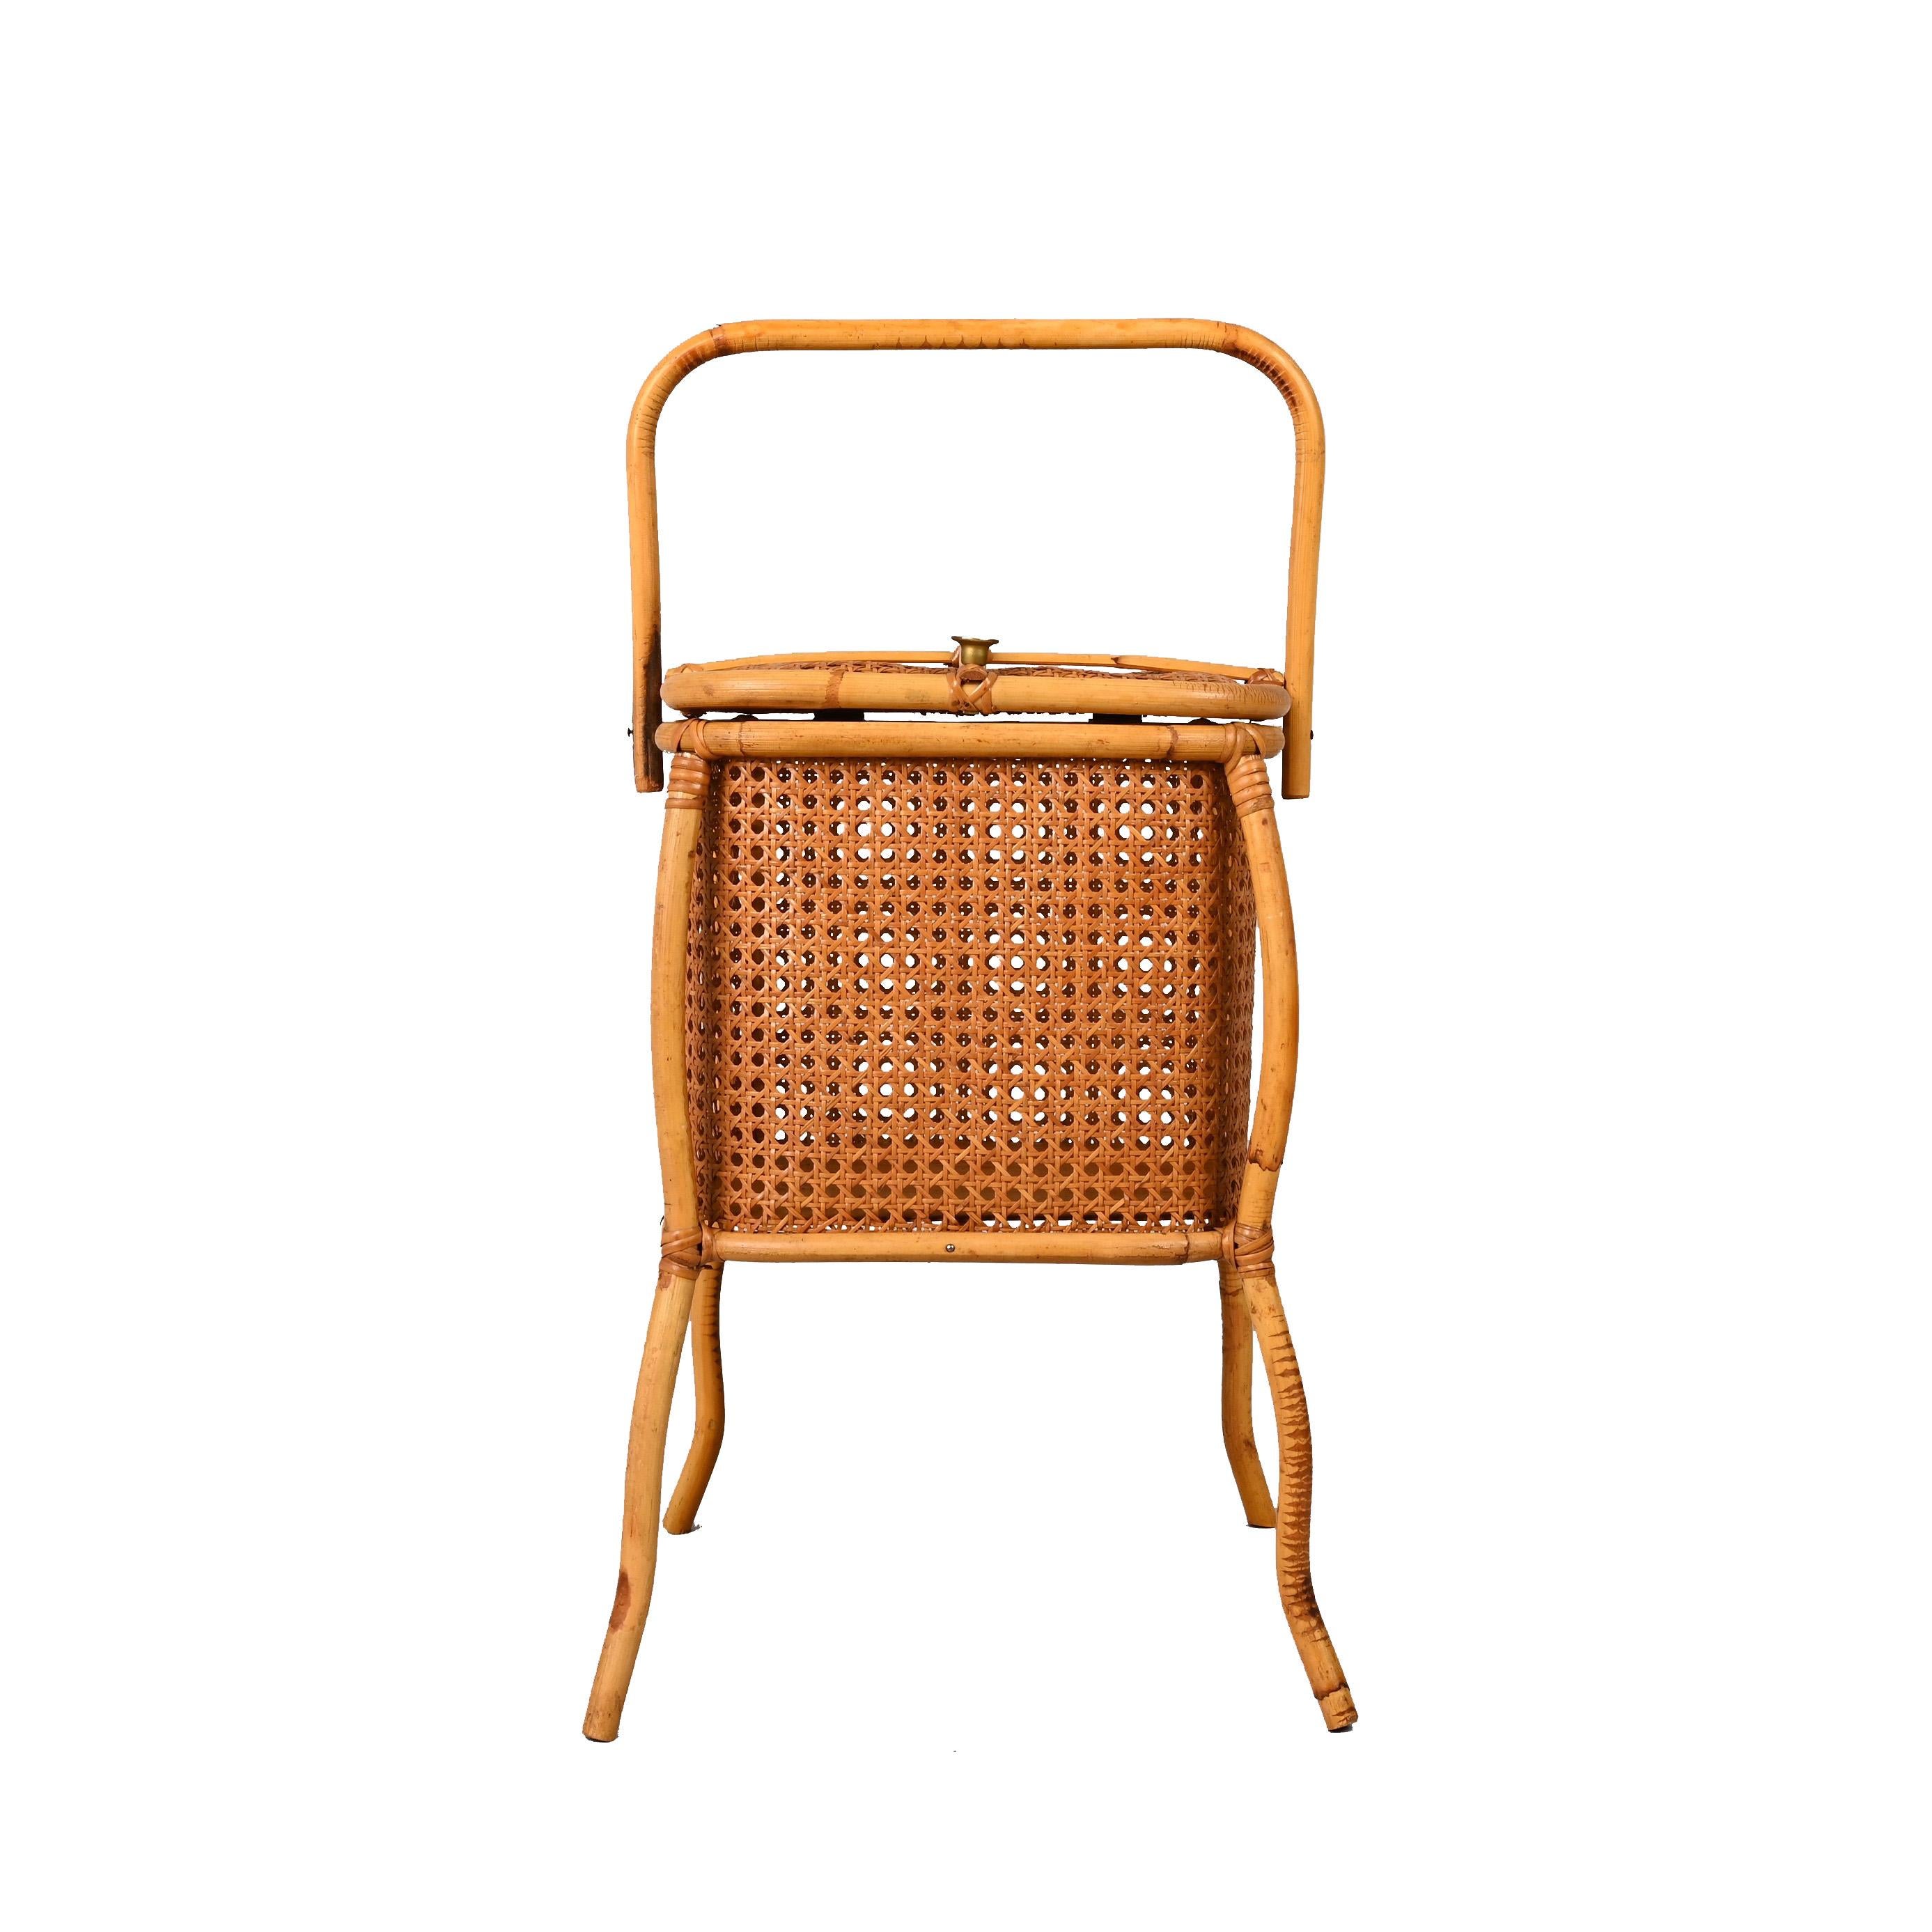 20th Century Midcentury Bamboo, Wicker and Vienna Straw Cubic Italian Magazine Basket, 1960s For Sale